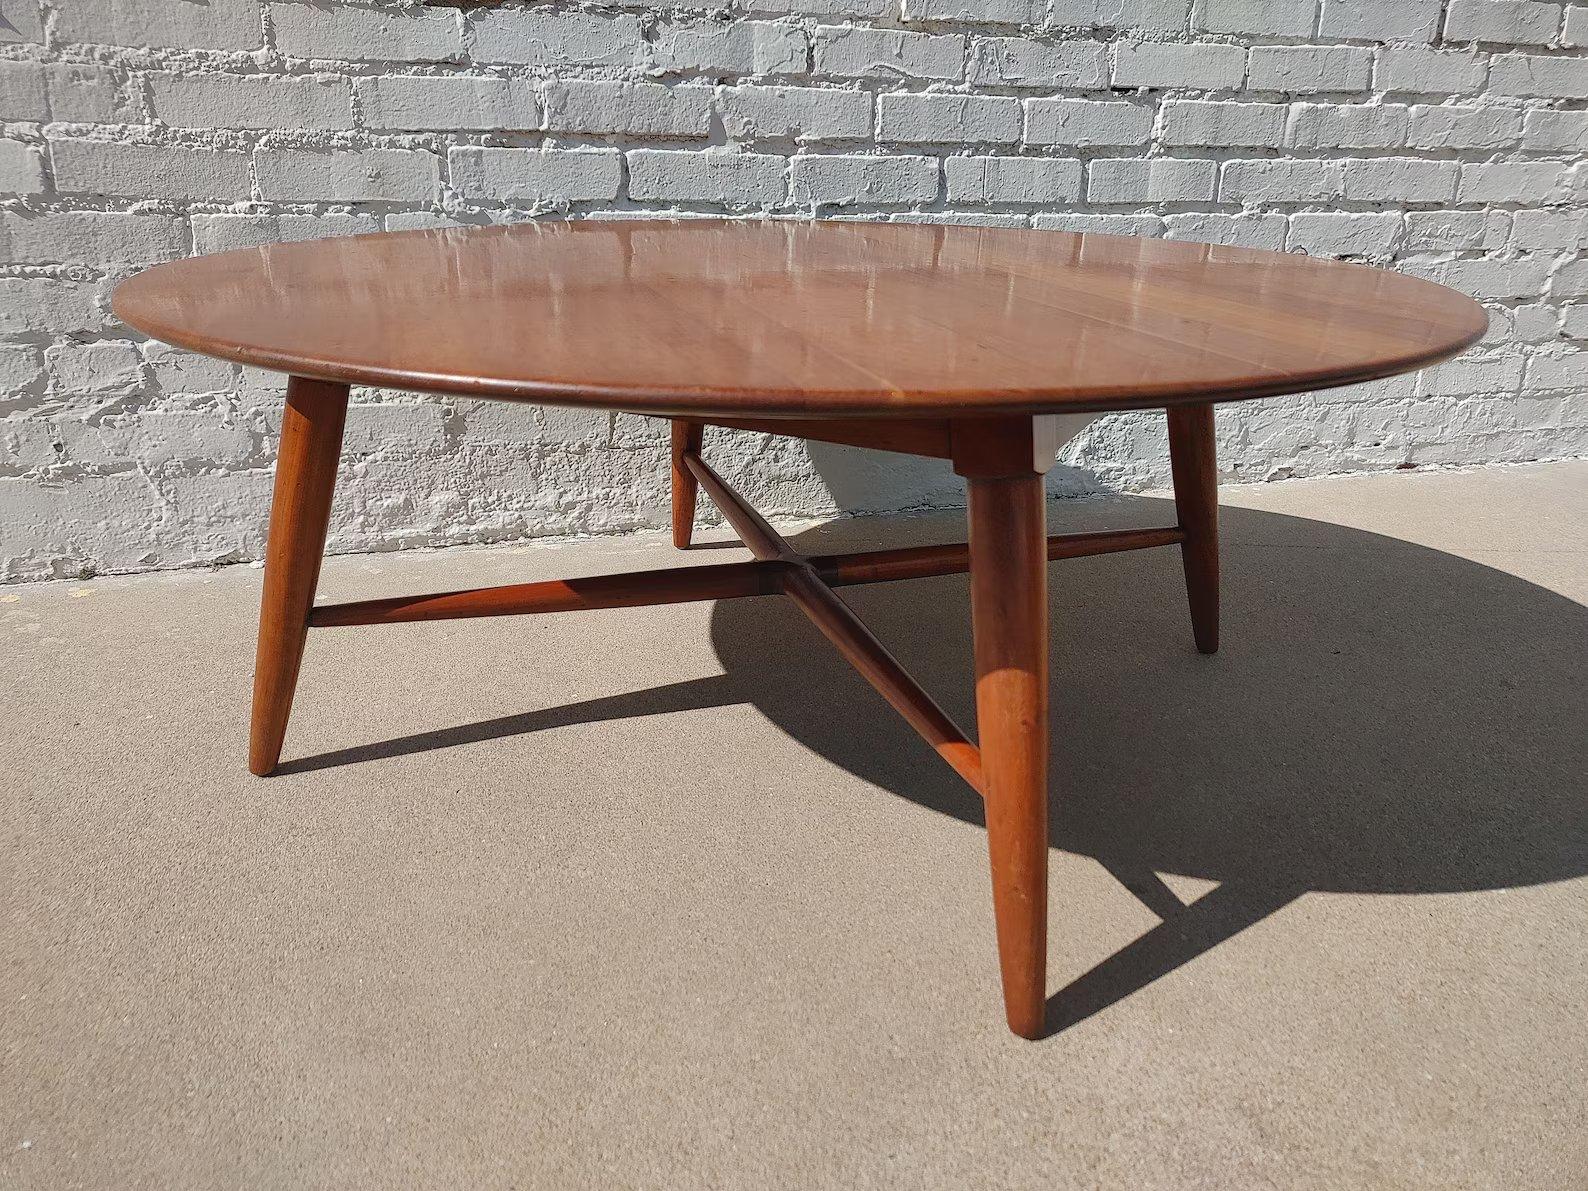 Mid Century Modern Willett Solid Cherry Coffee Table

Above average vintage condition and structurally sound. Has some expected slight finish wear and scratching. Has some small dings on edges and finish wear. Outdoor listing pictures might appear